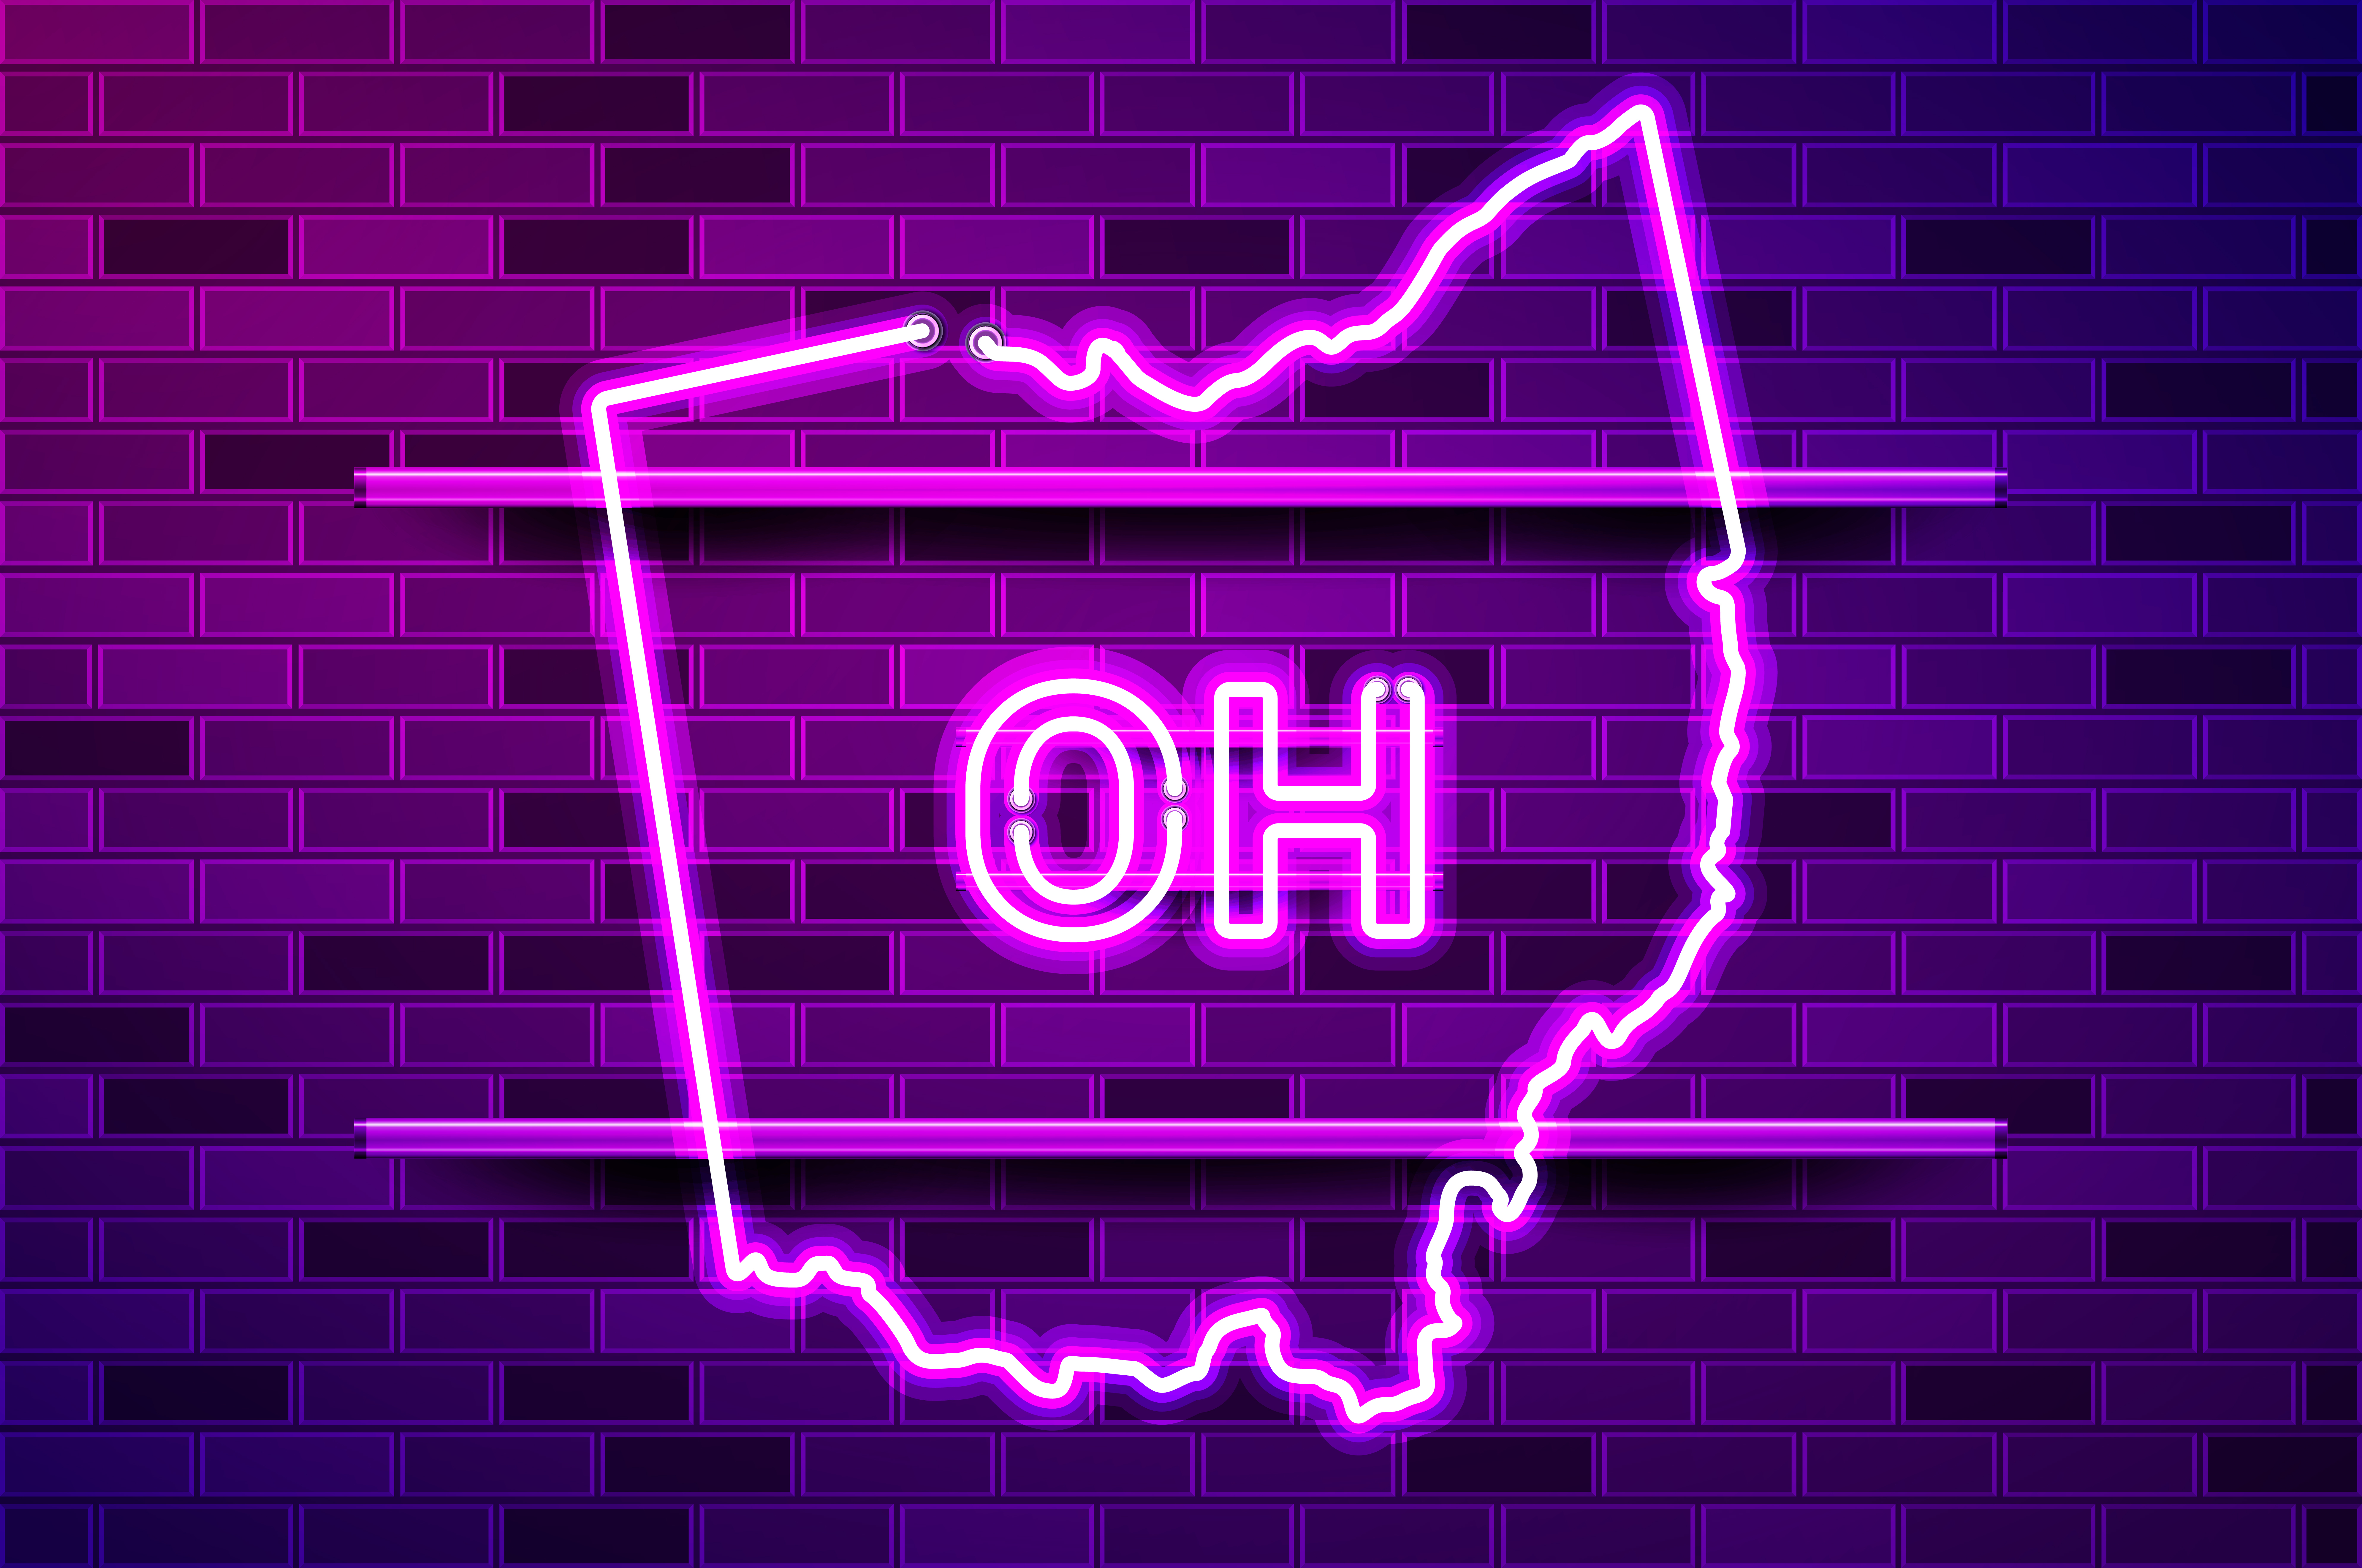 Ohio US state glowing neon lamp sign. Realistic vector illustration. Purple brick wall, violet glow, metal holders.. Ohio US state glowing purple neon lamp sign